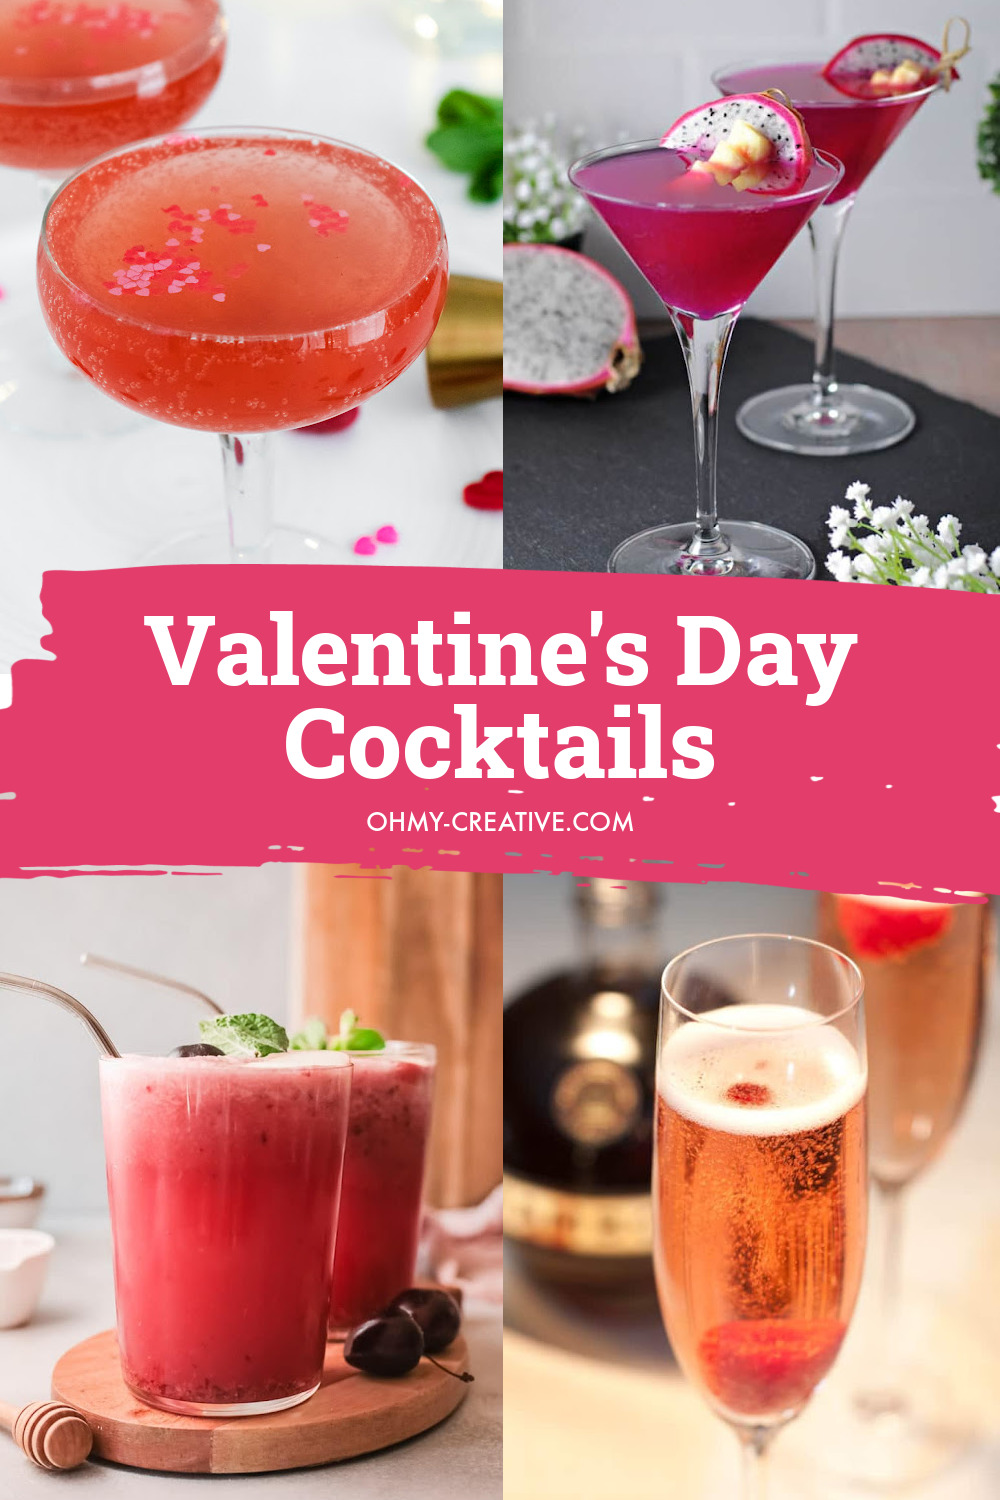 Valentine’s Day Cocktails To Share With Your Sweetheart